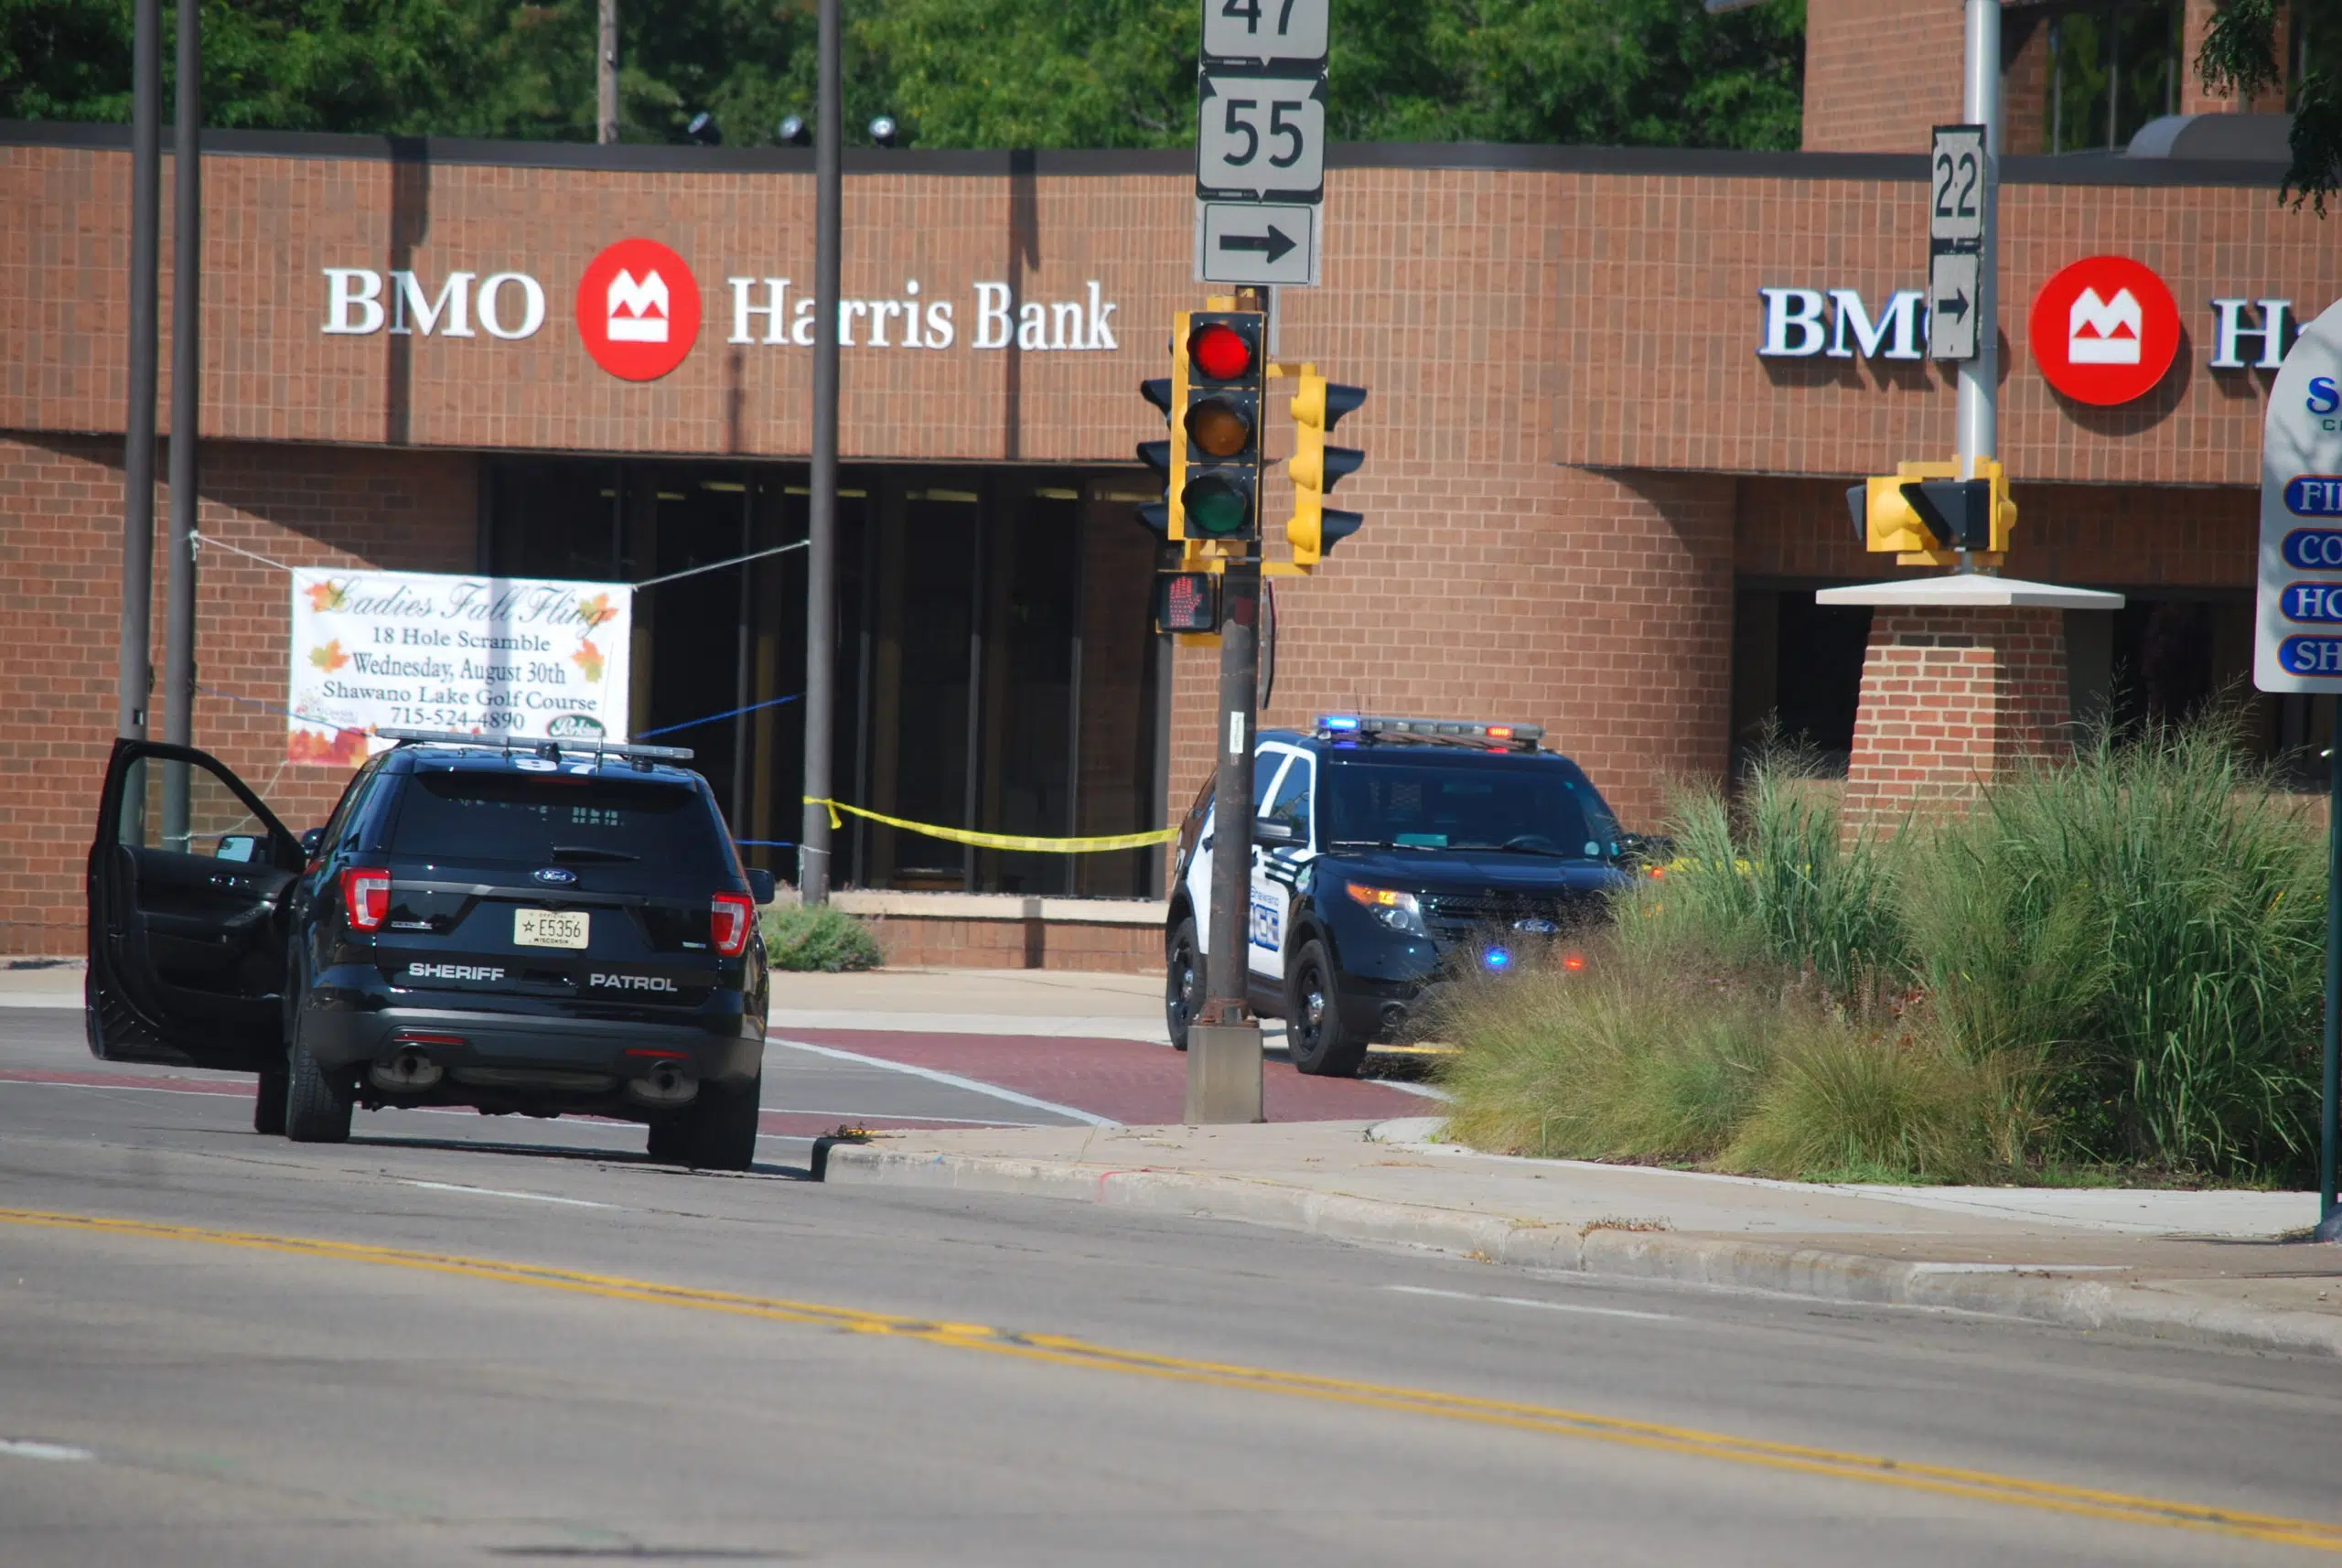 Shawano Police Clear The Scene Of A Suspicious Package At BMO Harris Bank